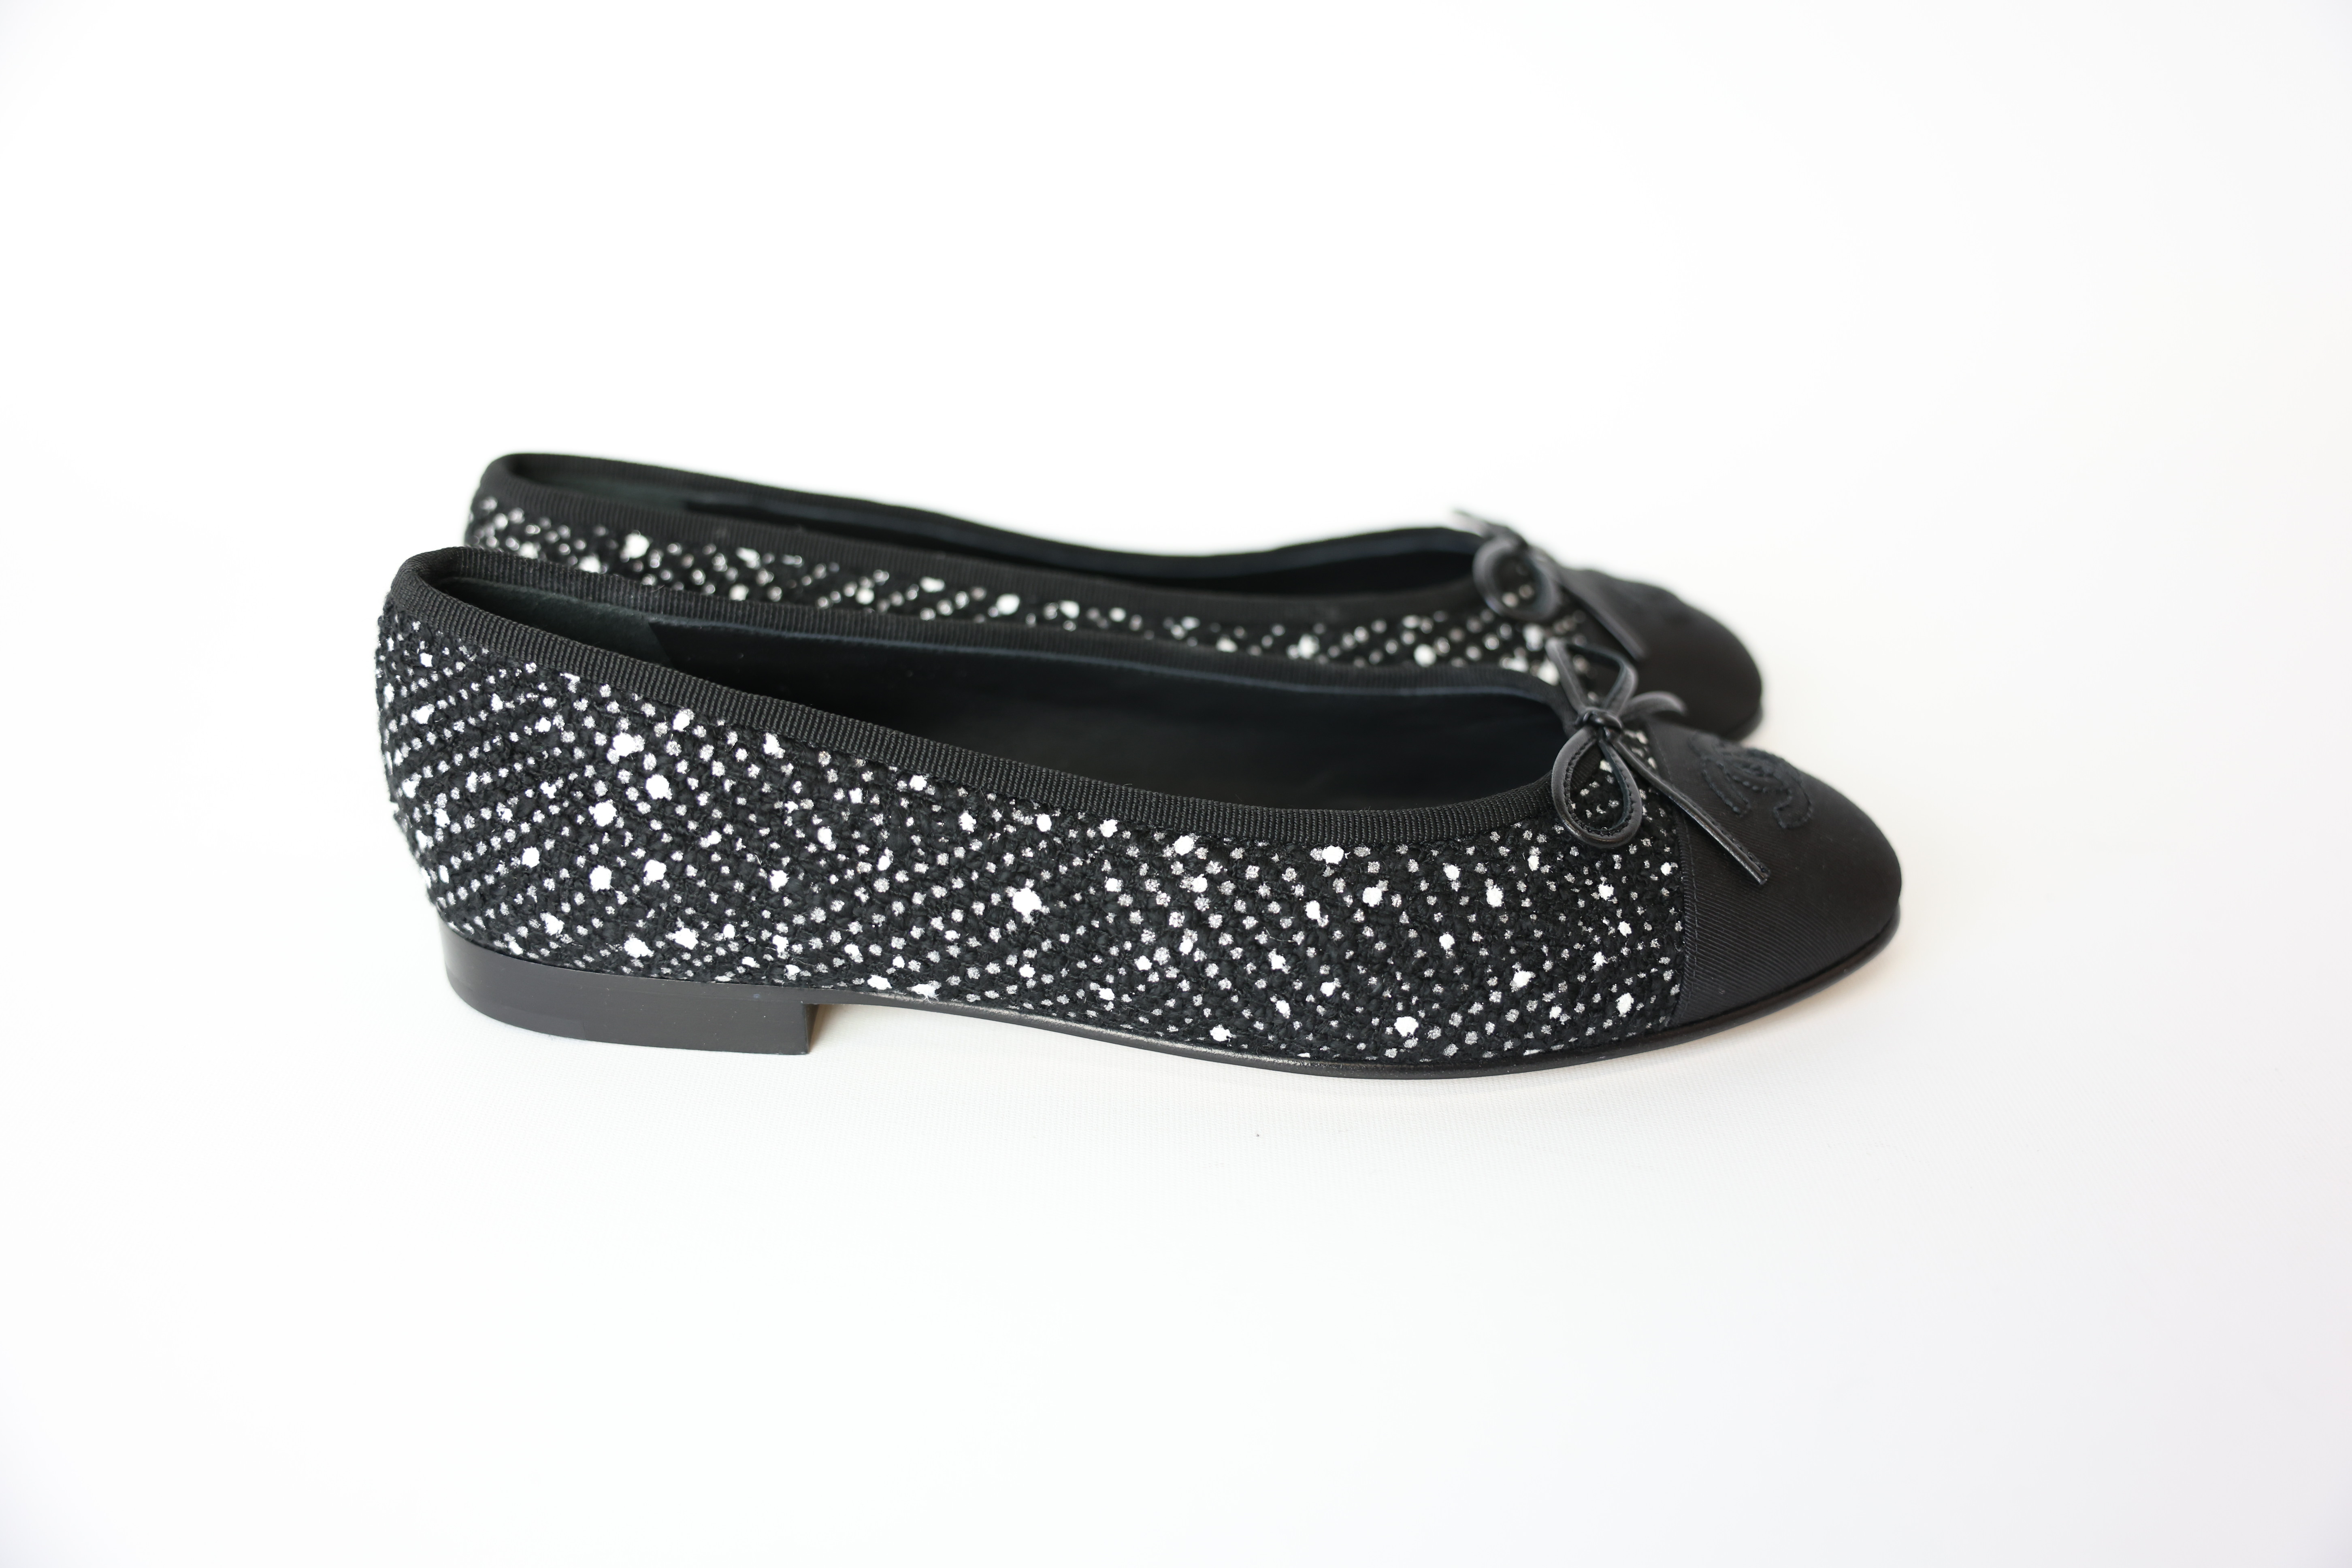 Chanel Ballet Flats, Black and White Tweed, Size 38.5, New in Box